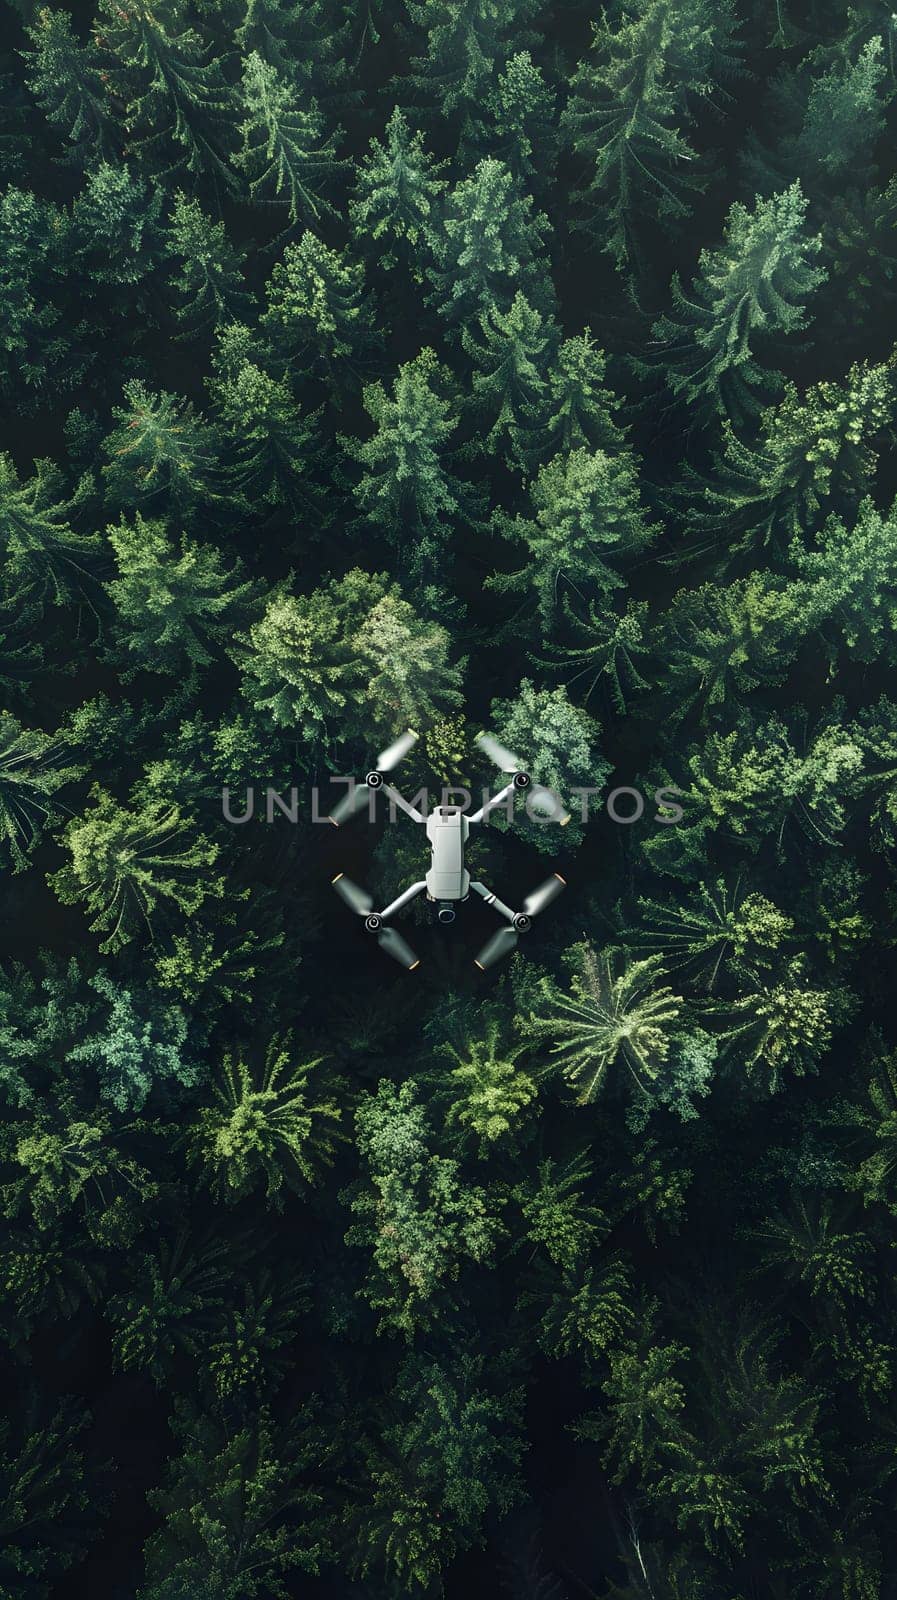 A drone captures the natural landscape of a forest from above, showcasing a pattern of terrestrial plants, trees, grass, and evergreens